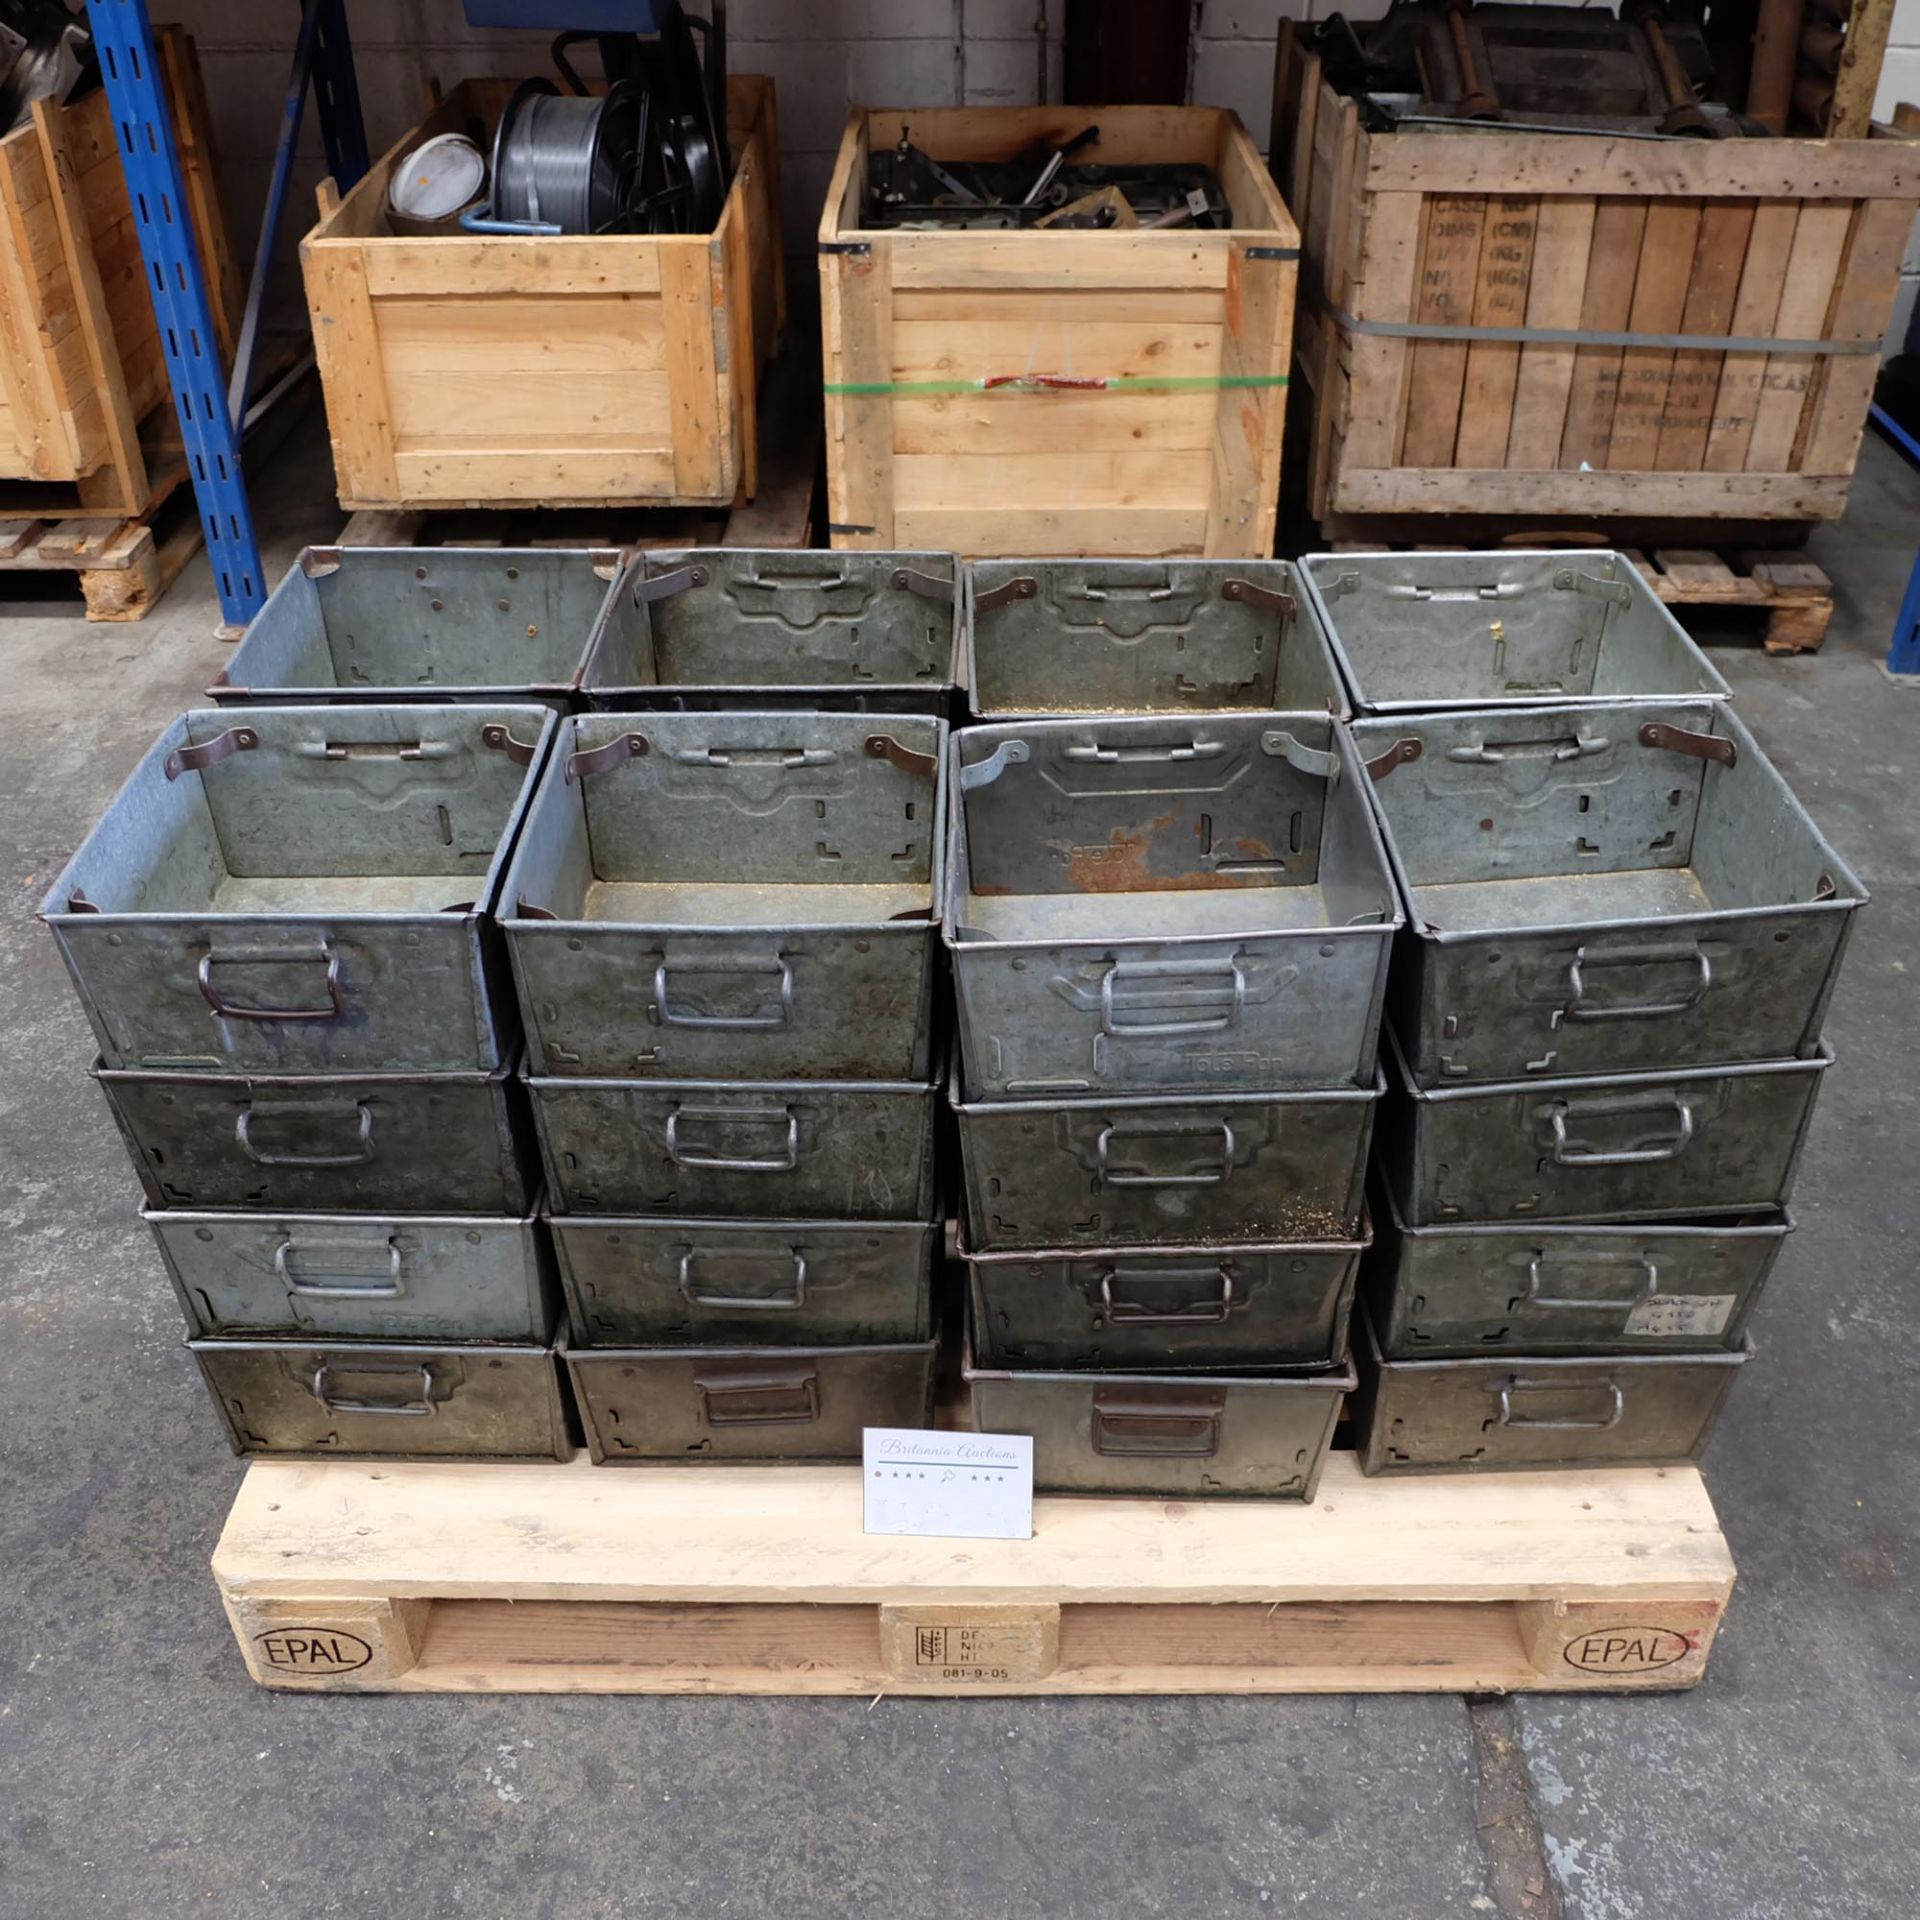 Quantity Of 32 Tote Bins With Handles.